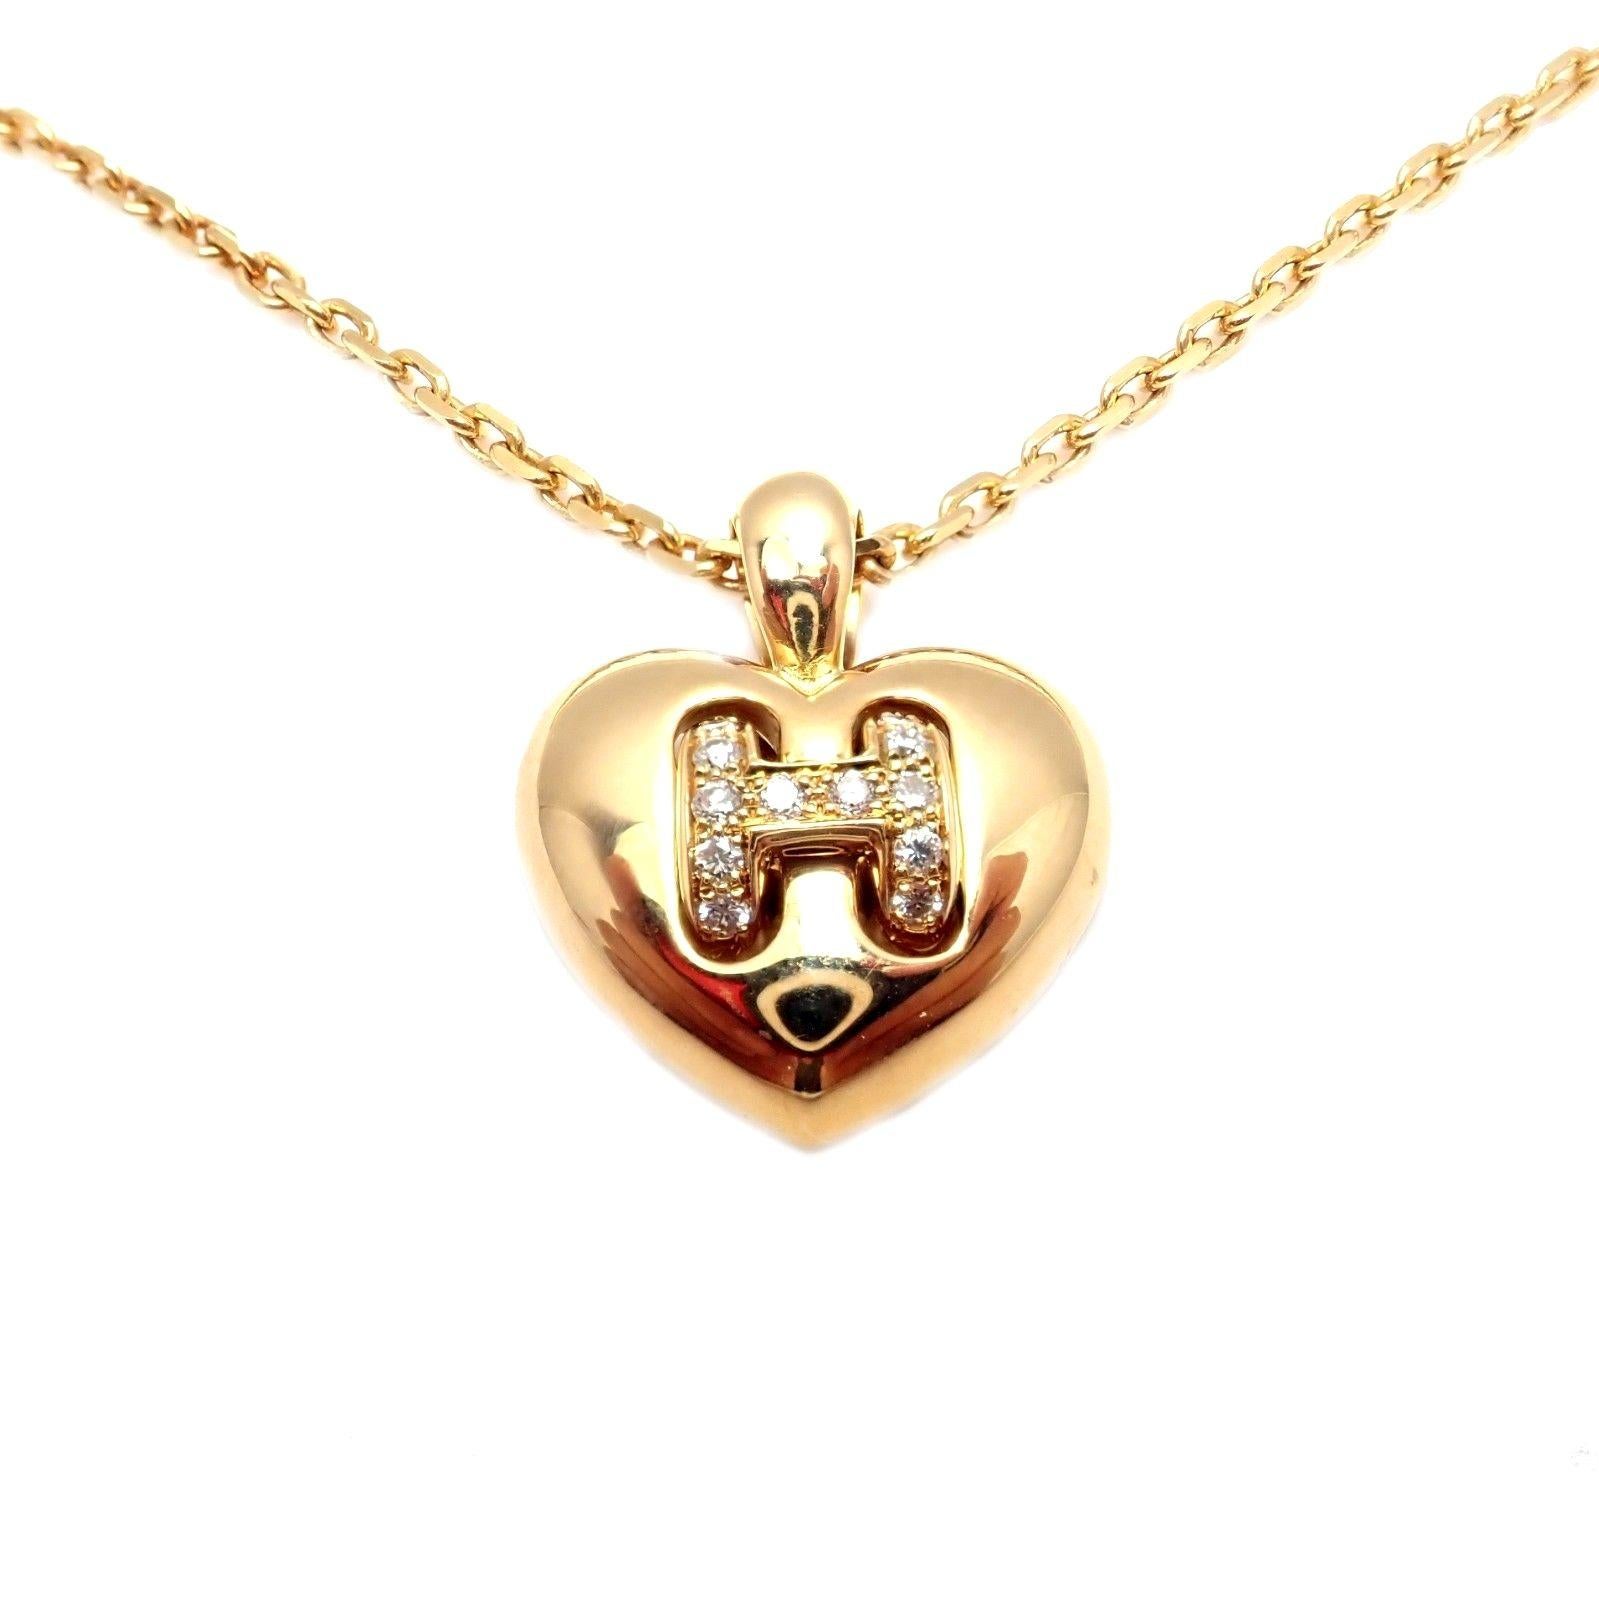 18k Yellow Gold Diamond H Heart Pendant Necklace by Hermes. 
With 12 Round Brilliant Cut Diamonds, VS1 Clarity, G Color. Total Diamond Weight: .25CT. 
Details: 
Length: 15